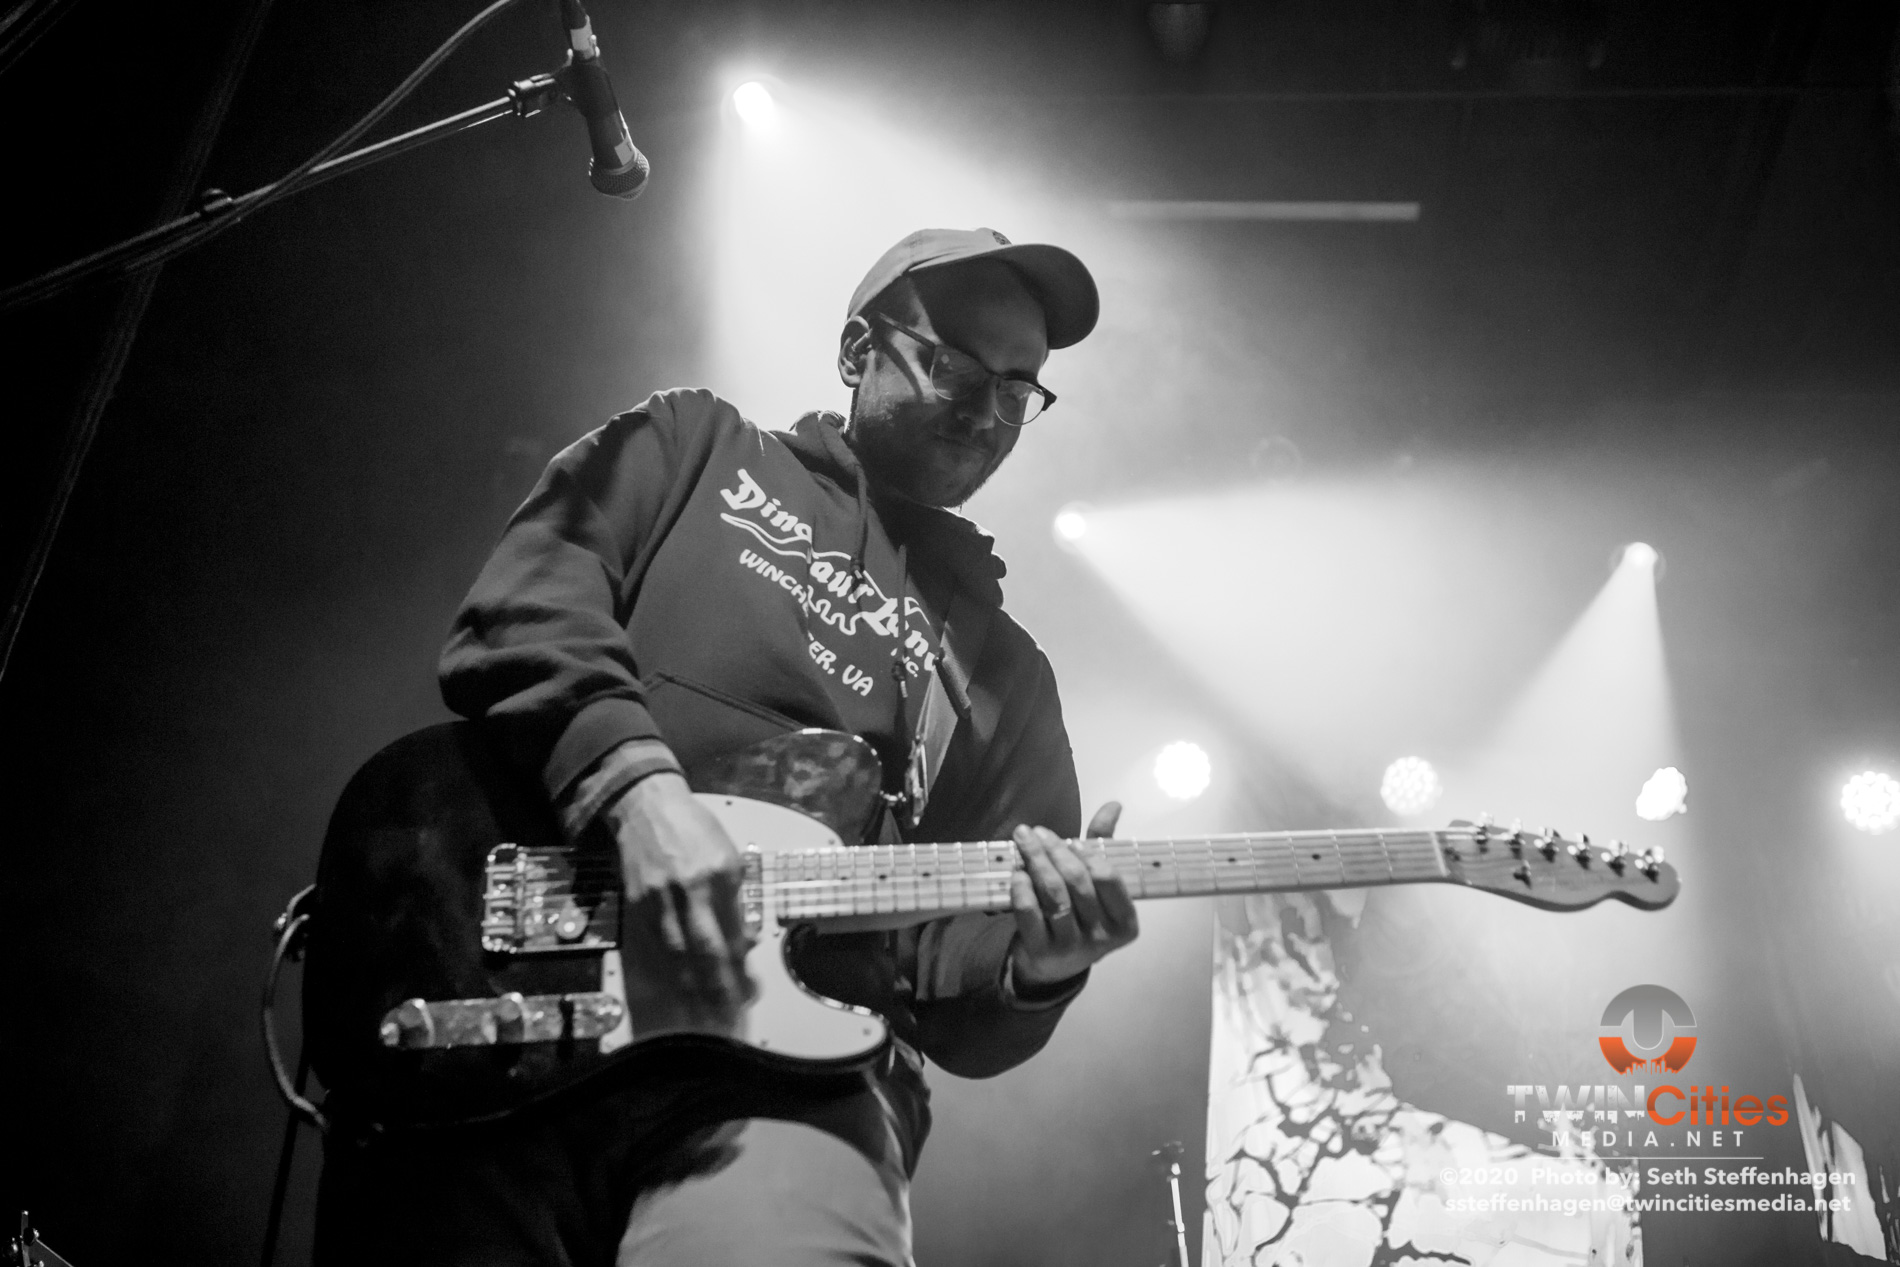 January 30, 2020 - Minneapolis, Minnesota, United States -  mewithoutYou live in concert at First Avenue opening for Thrice.

(Photo by Seth Steffenhagen/Steffenhagen Photography)